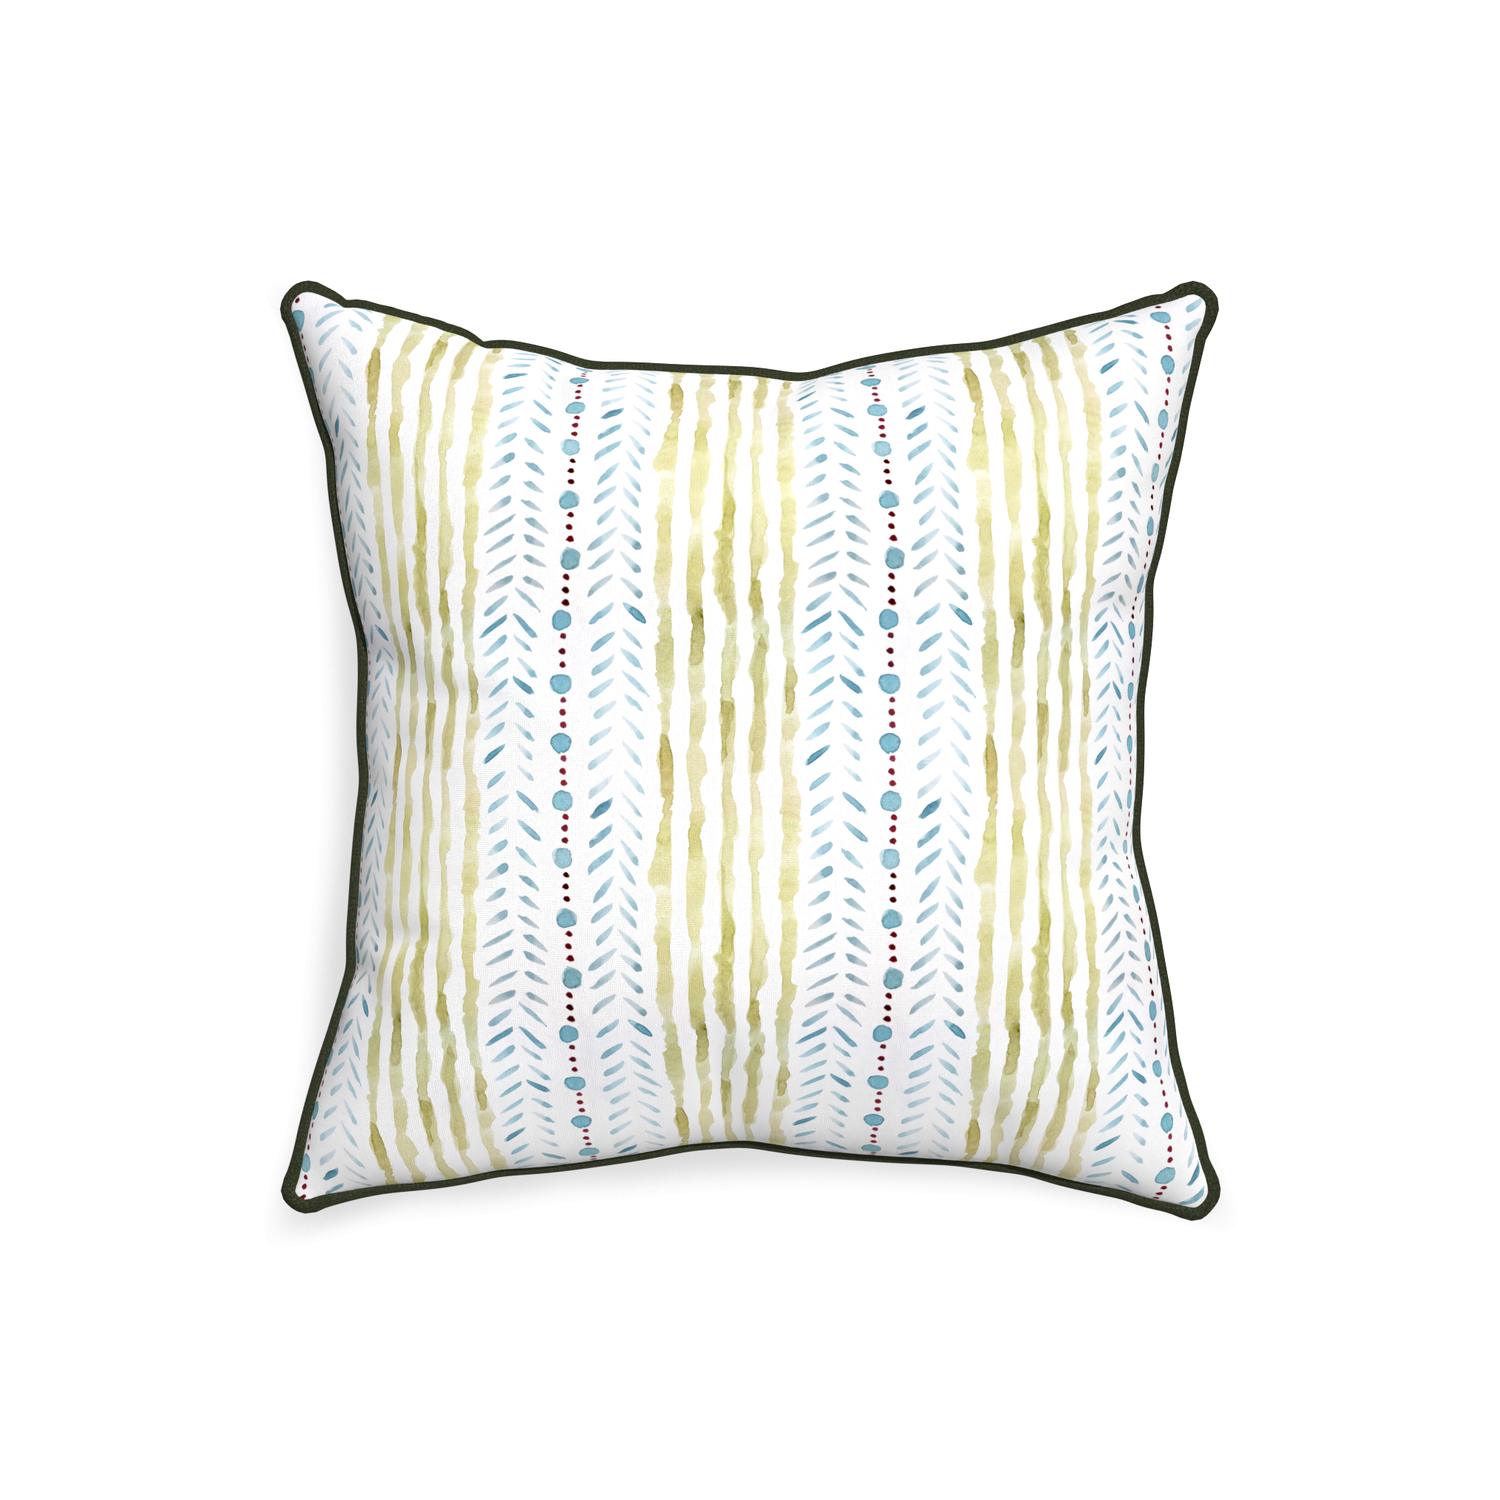 20-square julia custom blue & green stripedpillow with f piping on white background